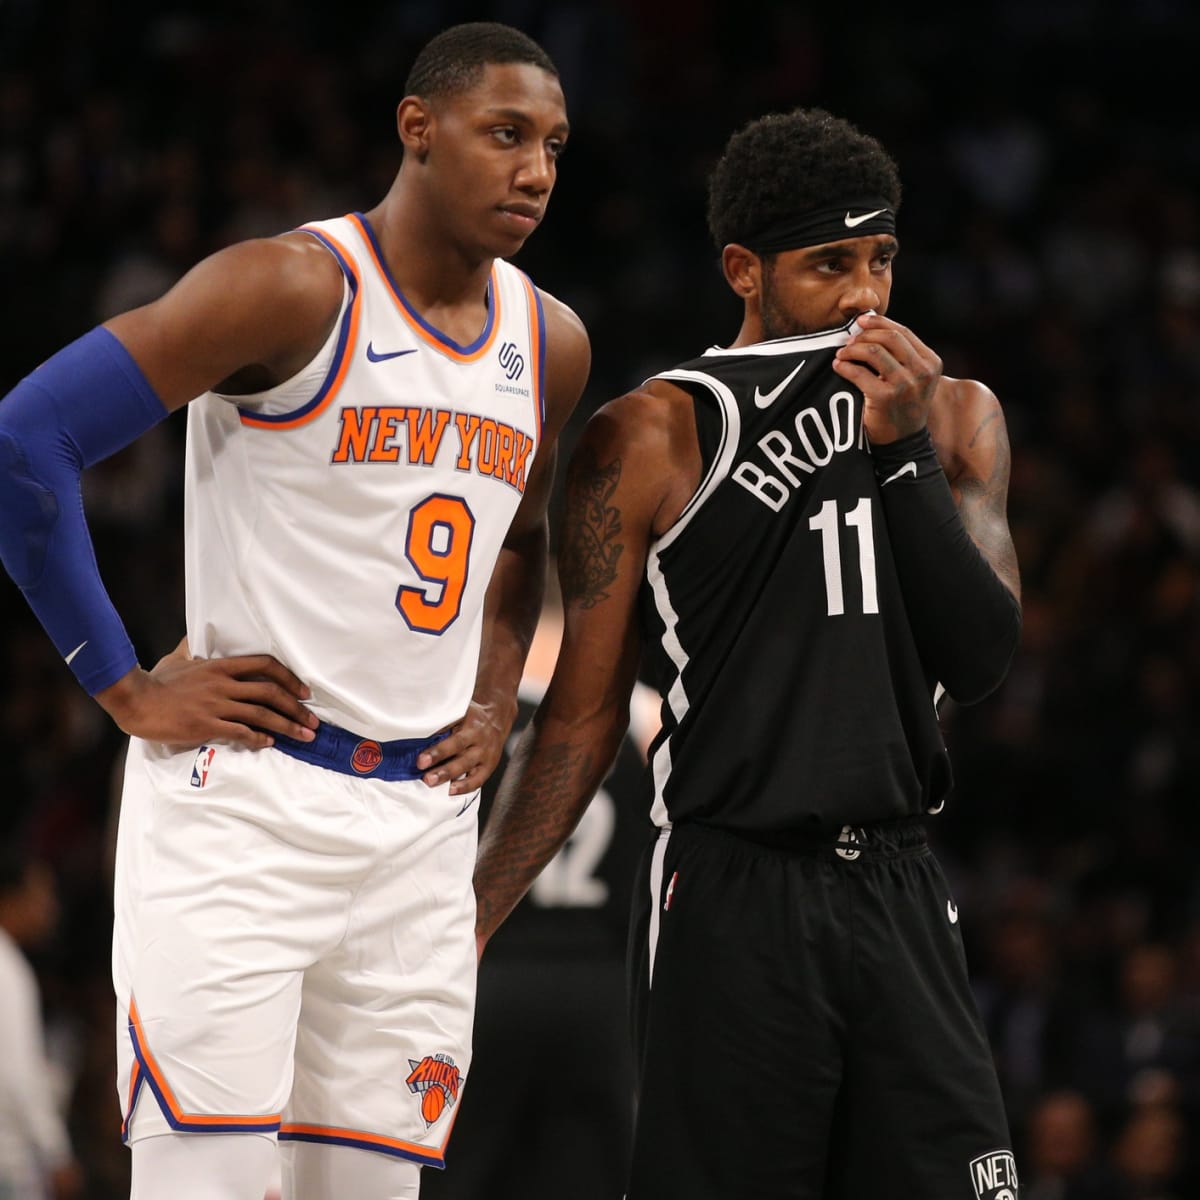 Kyrie Irving Brooklyn Nets Game-Used #11 White Jersey vs. New York Knicks  on April 6 2022 - Size 50+4